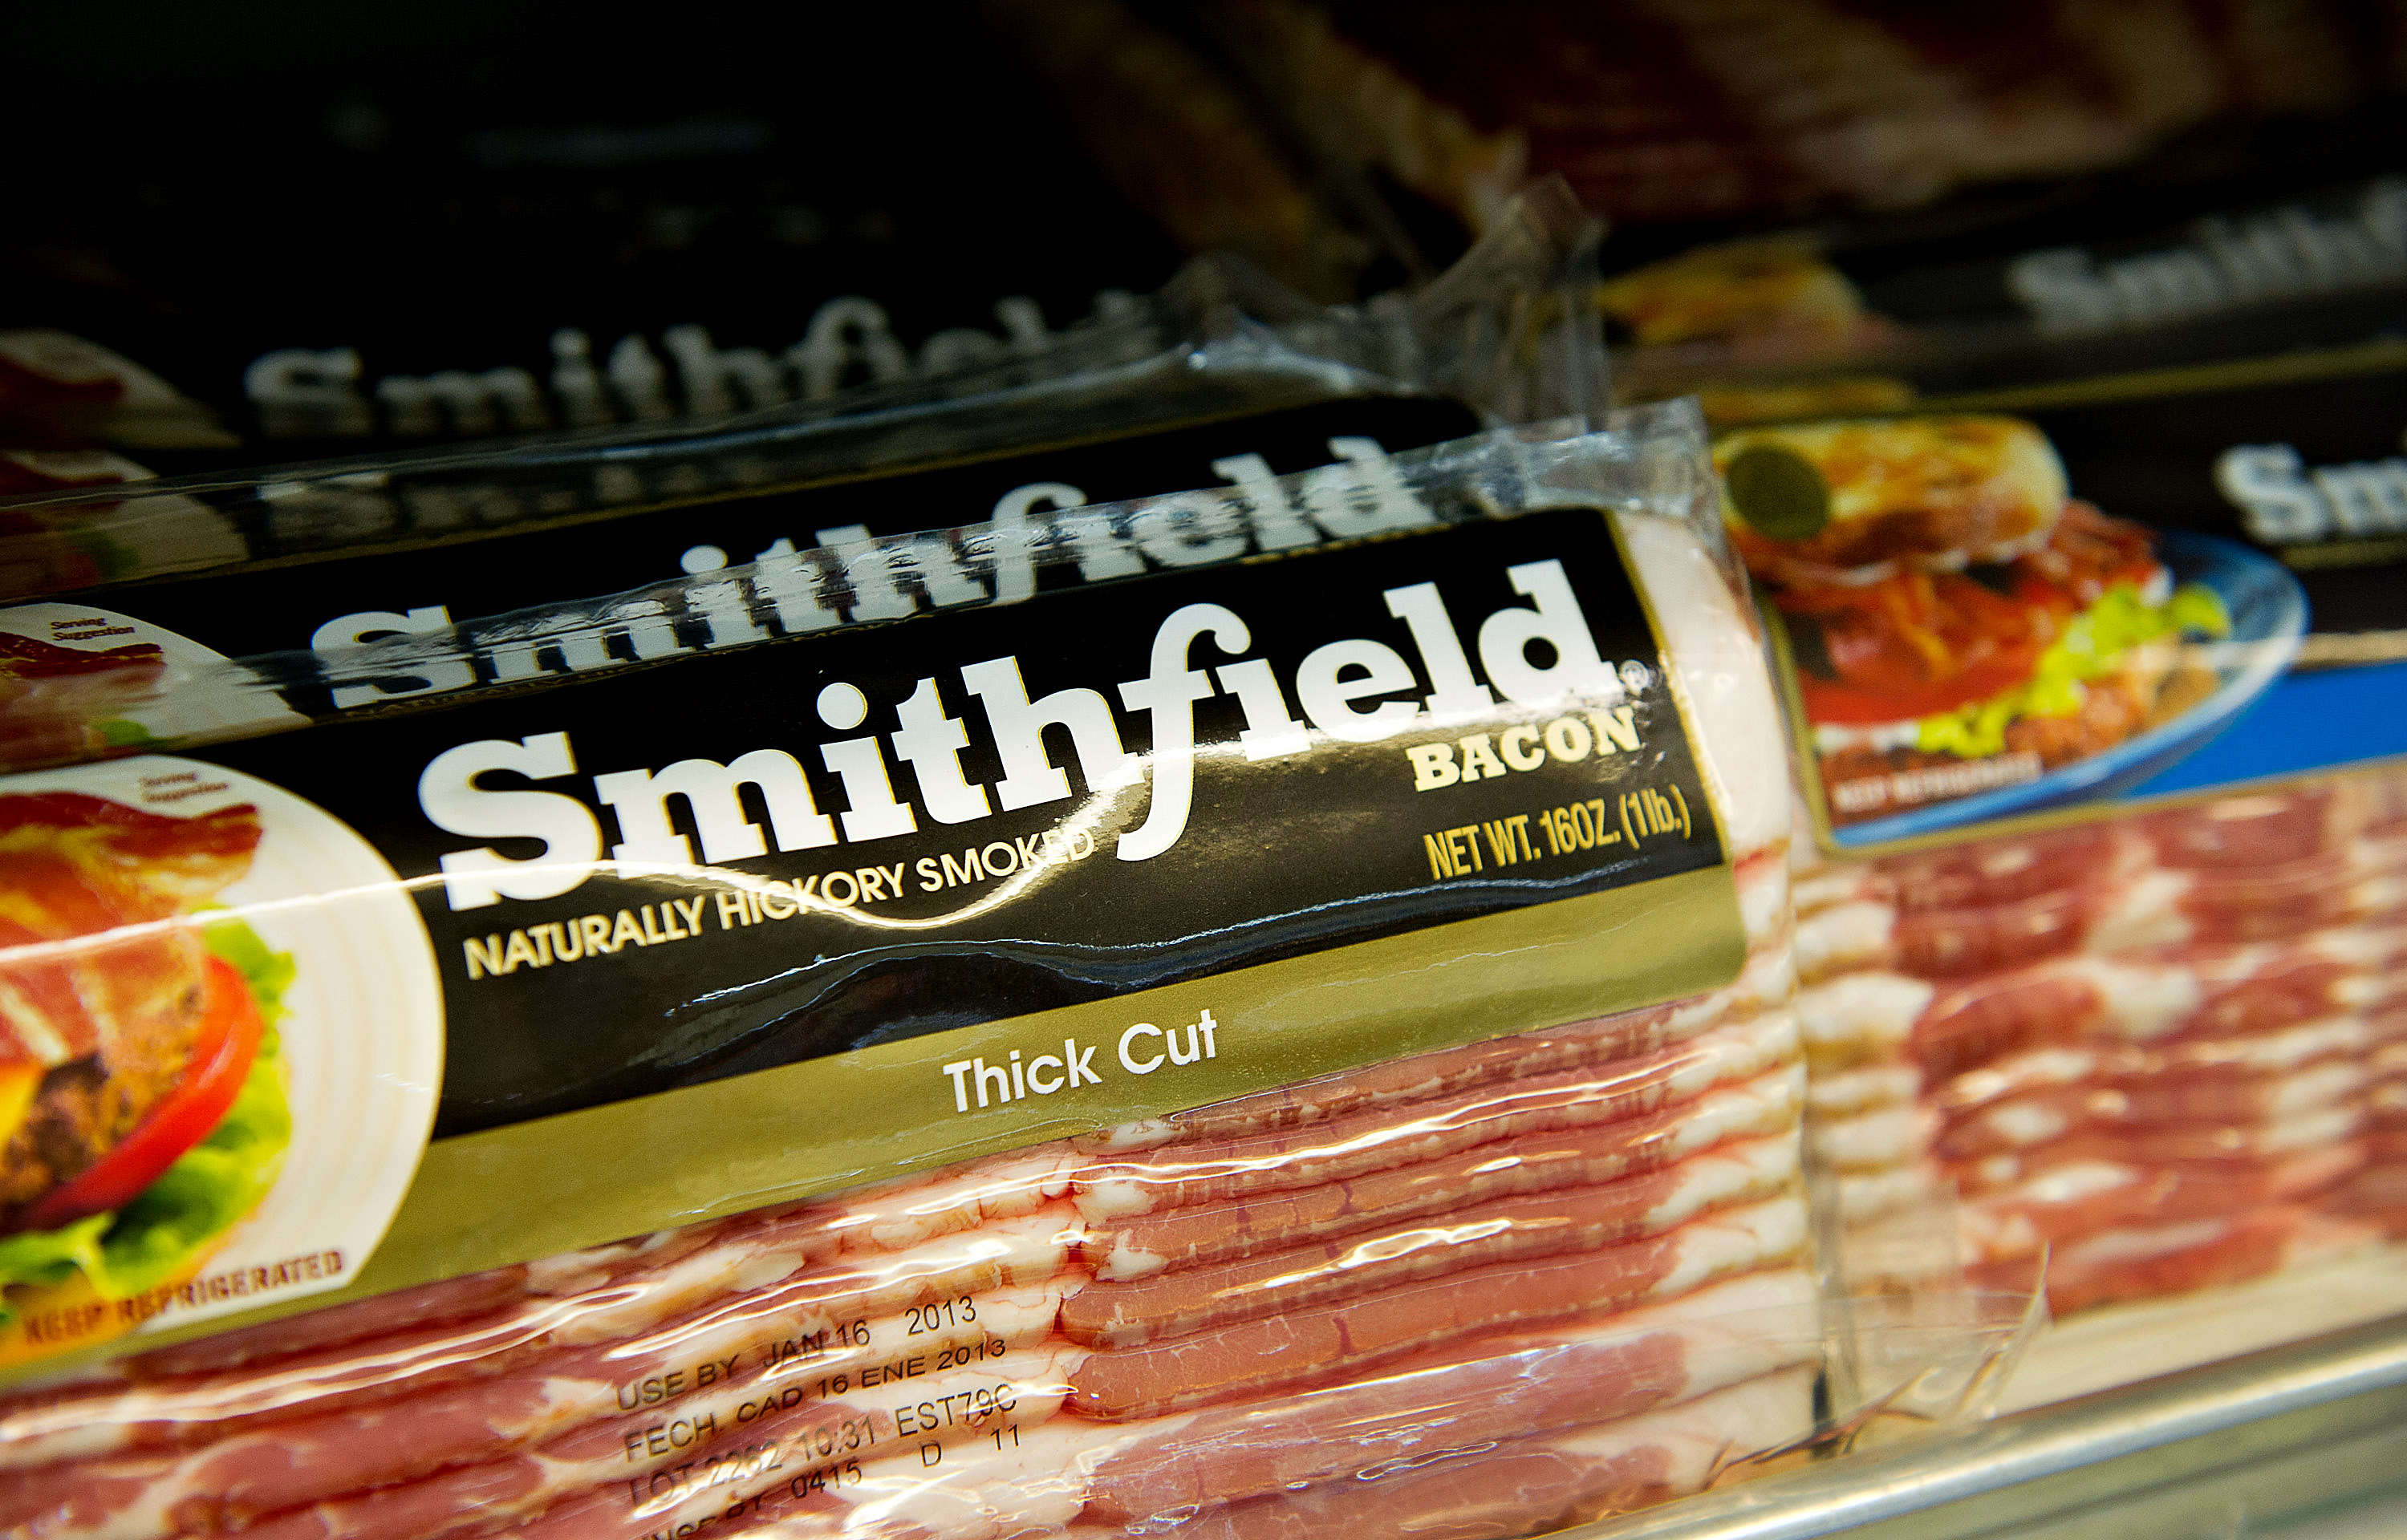 Smithfield is one of the oldest names in the US meat industry. Photo: Bloomberg